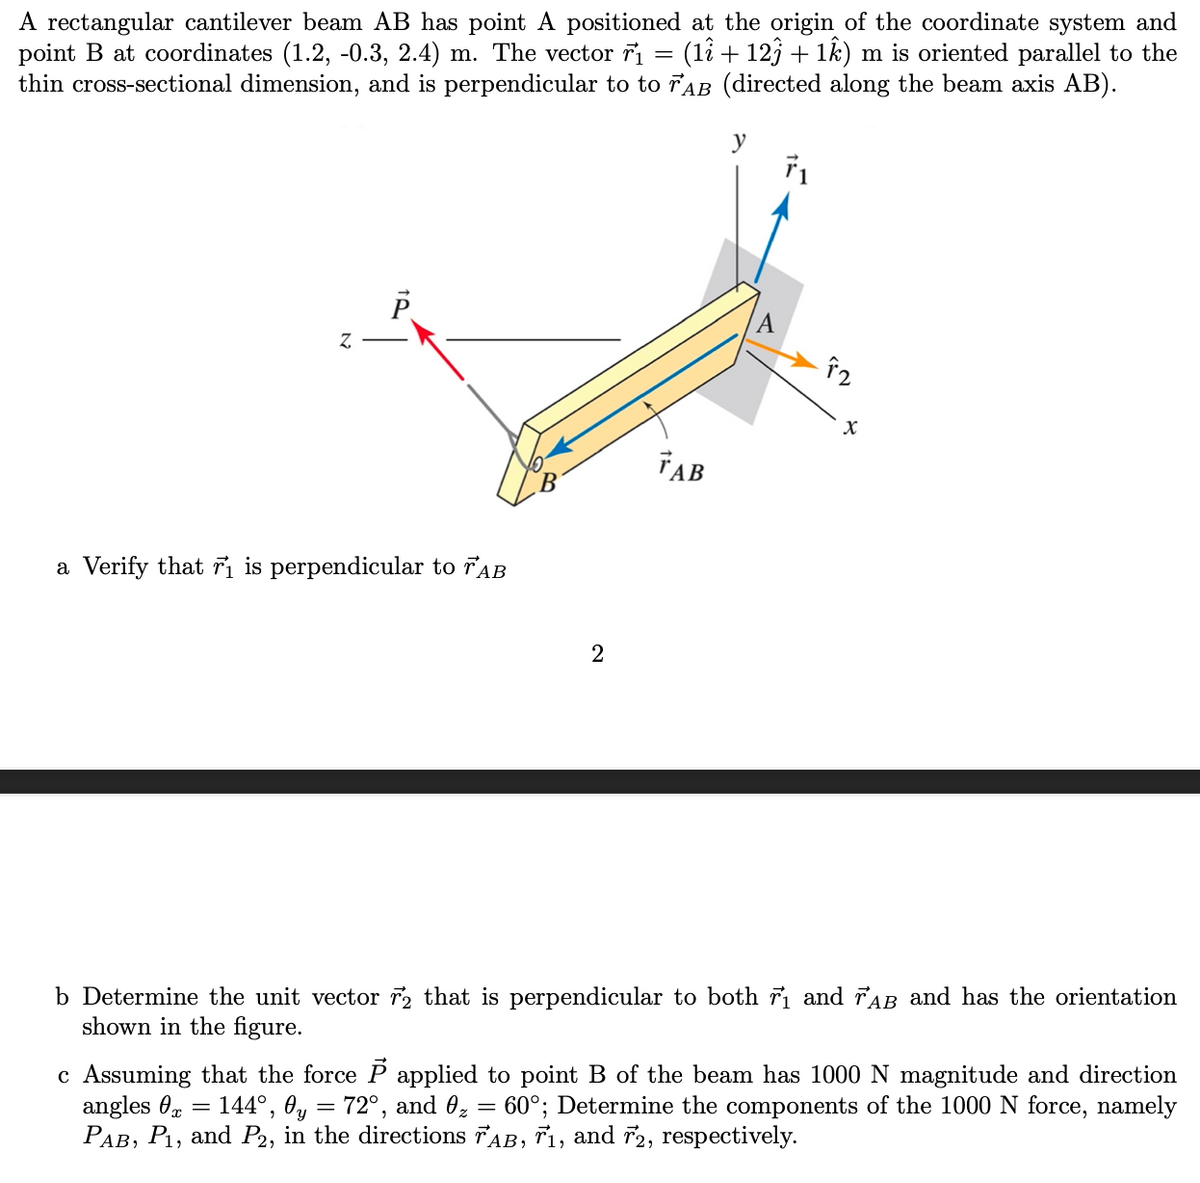 A rectangular cantilever beam AB has point A positioned at the origin of the coordinate system and
point B at coordinates (1.2, -0.3, 2.4) m. The vector r₁ = (1î + 12ĵ + 1ê) m is oriented parallel to the
thin cross-sectional dimension, and is perpendicular to to FAB (directed along the beam axis AB).
Z
P
a Verify that r₁ is perpendicular to TAB
2
TAB
X
b Determine the unit vector 2 that is perpendicular to both r₁ and rab and has the orientation
shown in the figure.
c Assuming that the force P applied to point B of the beam has 1000 N magnitude and direction
angles x 144°, 0y = 72°, and 0₂ = 60°; Determine the components of the 1000 N force, namely
PAB, P₁, and P2, in the directions AB, 7₁, and 2, respectively.
=
=